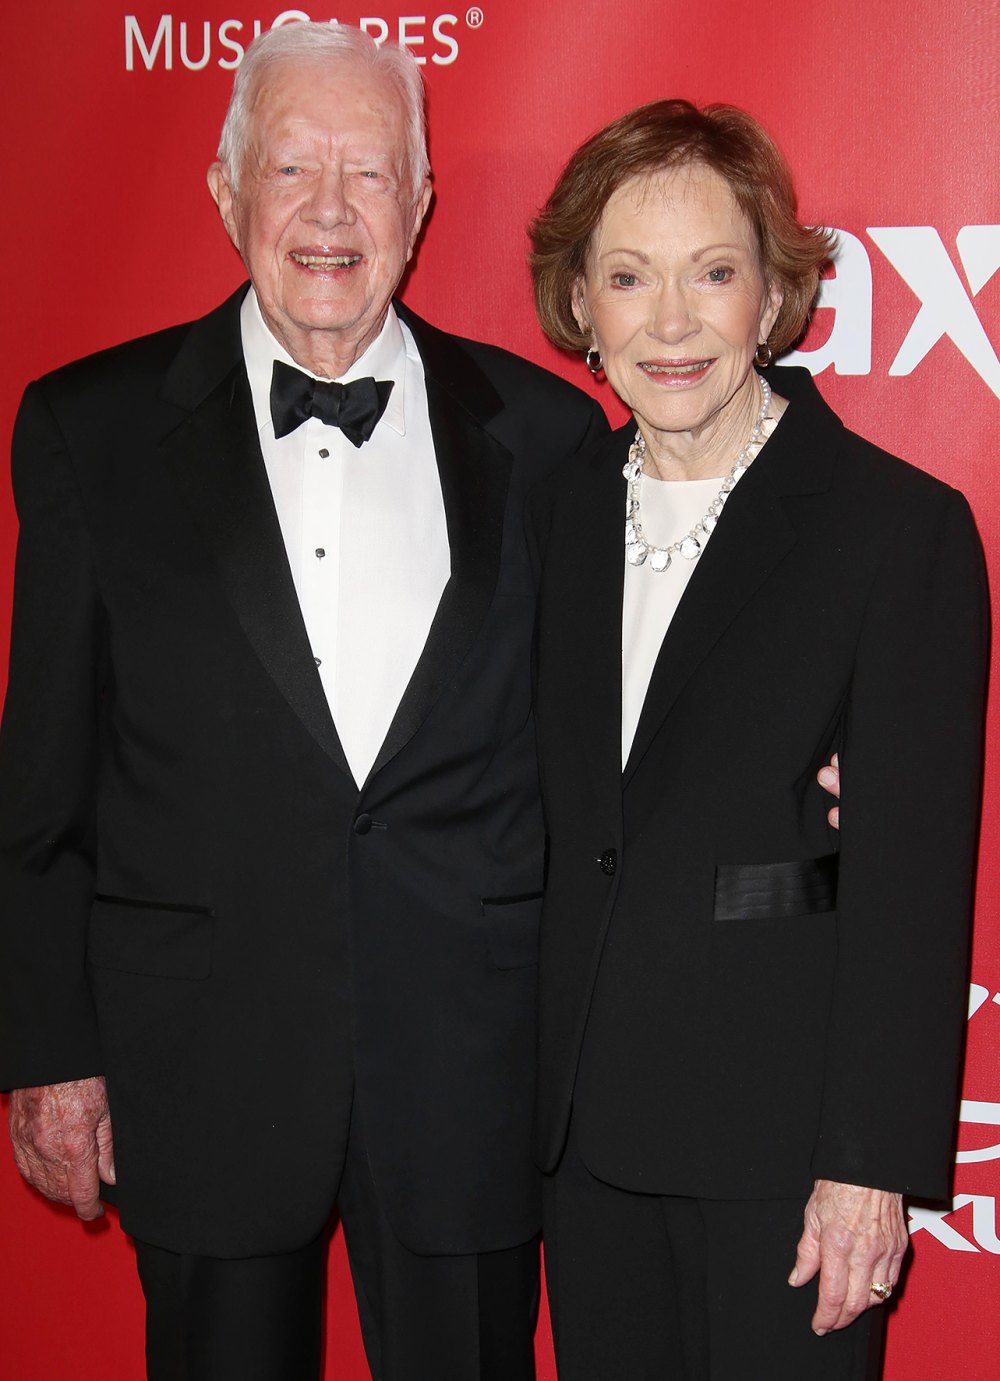 Former First Lady Rosalynn Carter Has Dementia, Is Living 'Happily at Home' with Husband Jimmy Carter